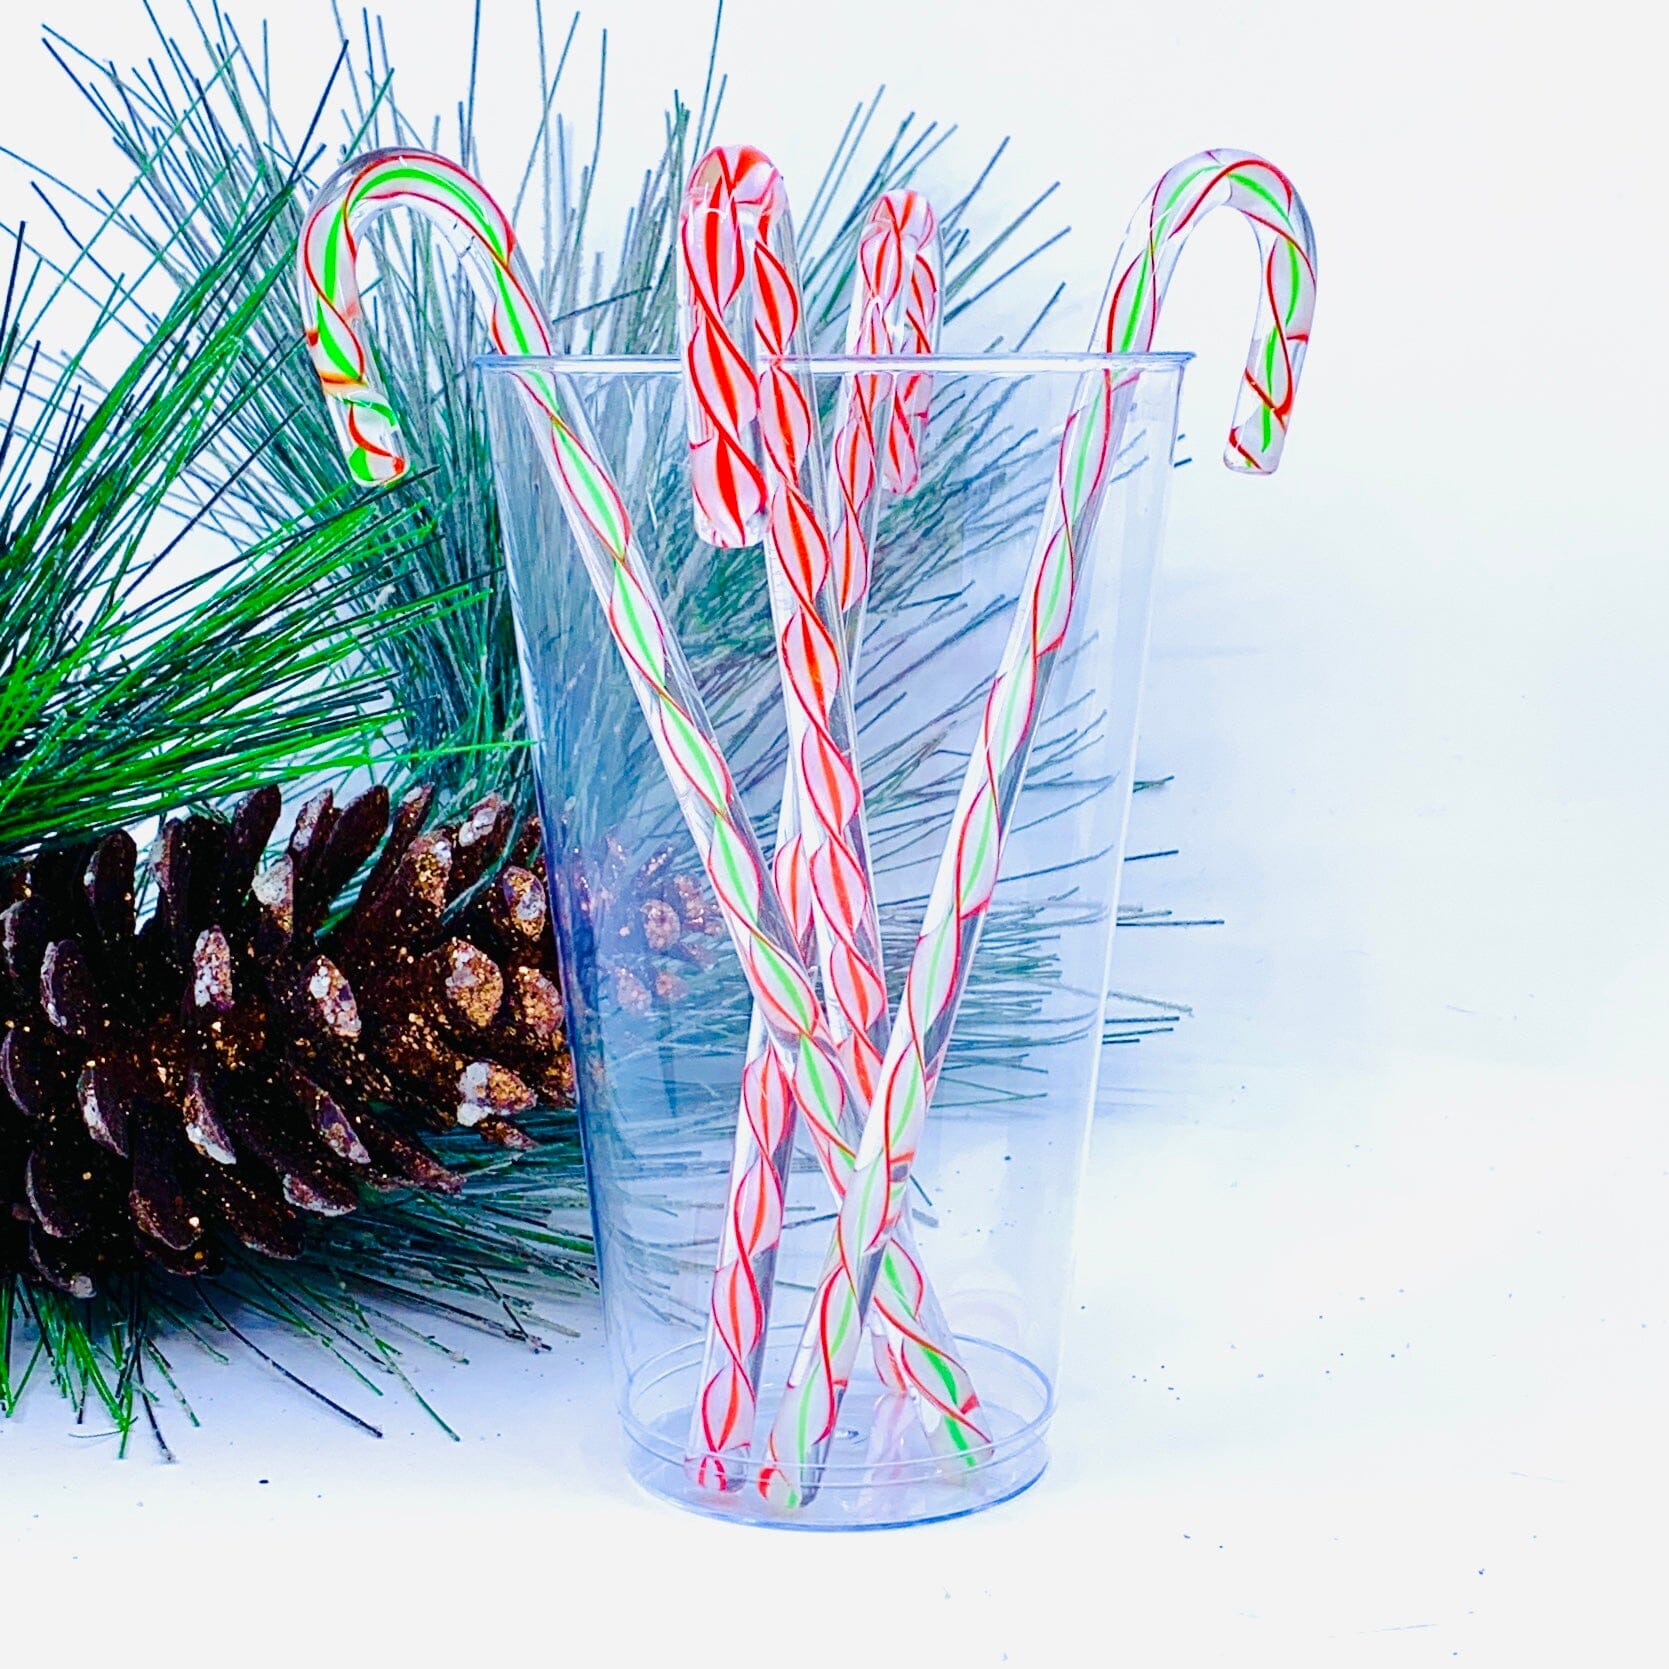 Candy Cane Swizzle Sticks 39 Ornament One Hundred 80 Degrees 